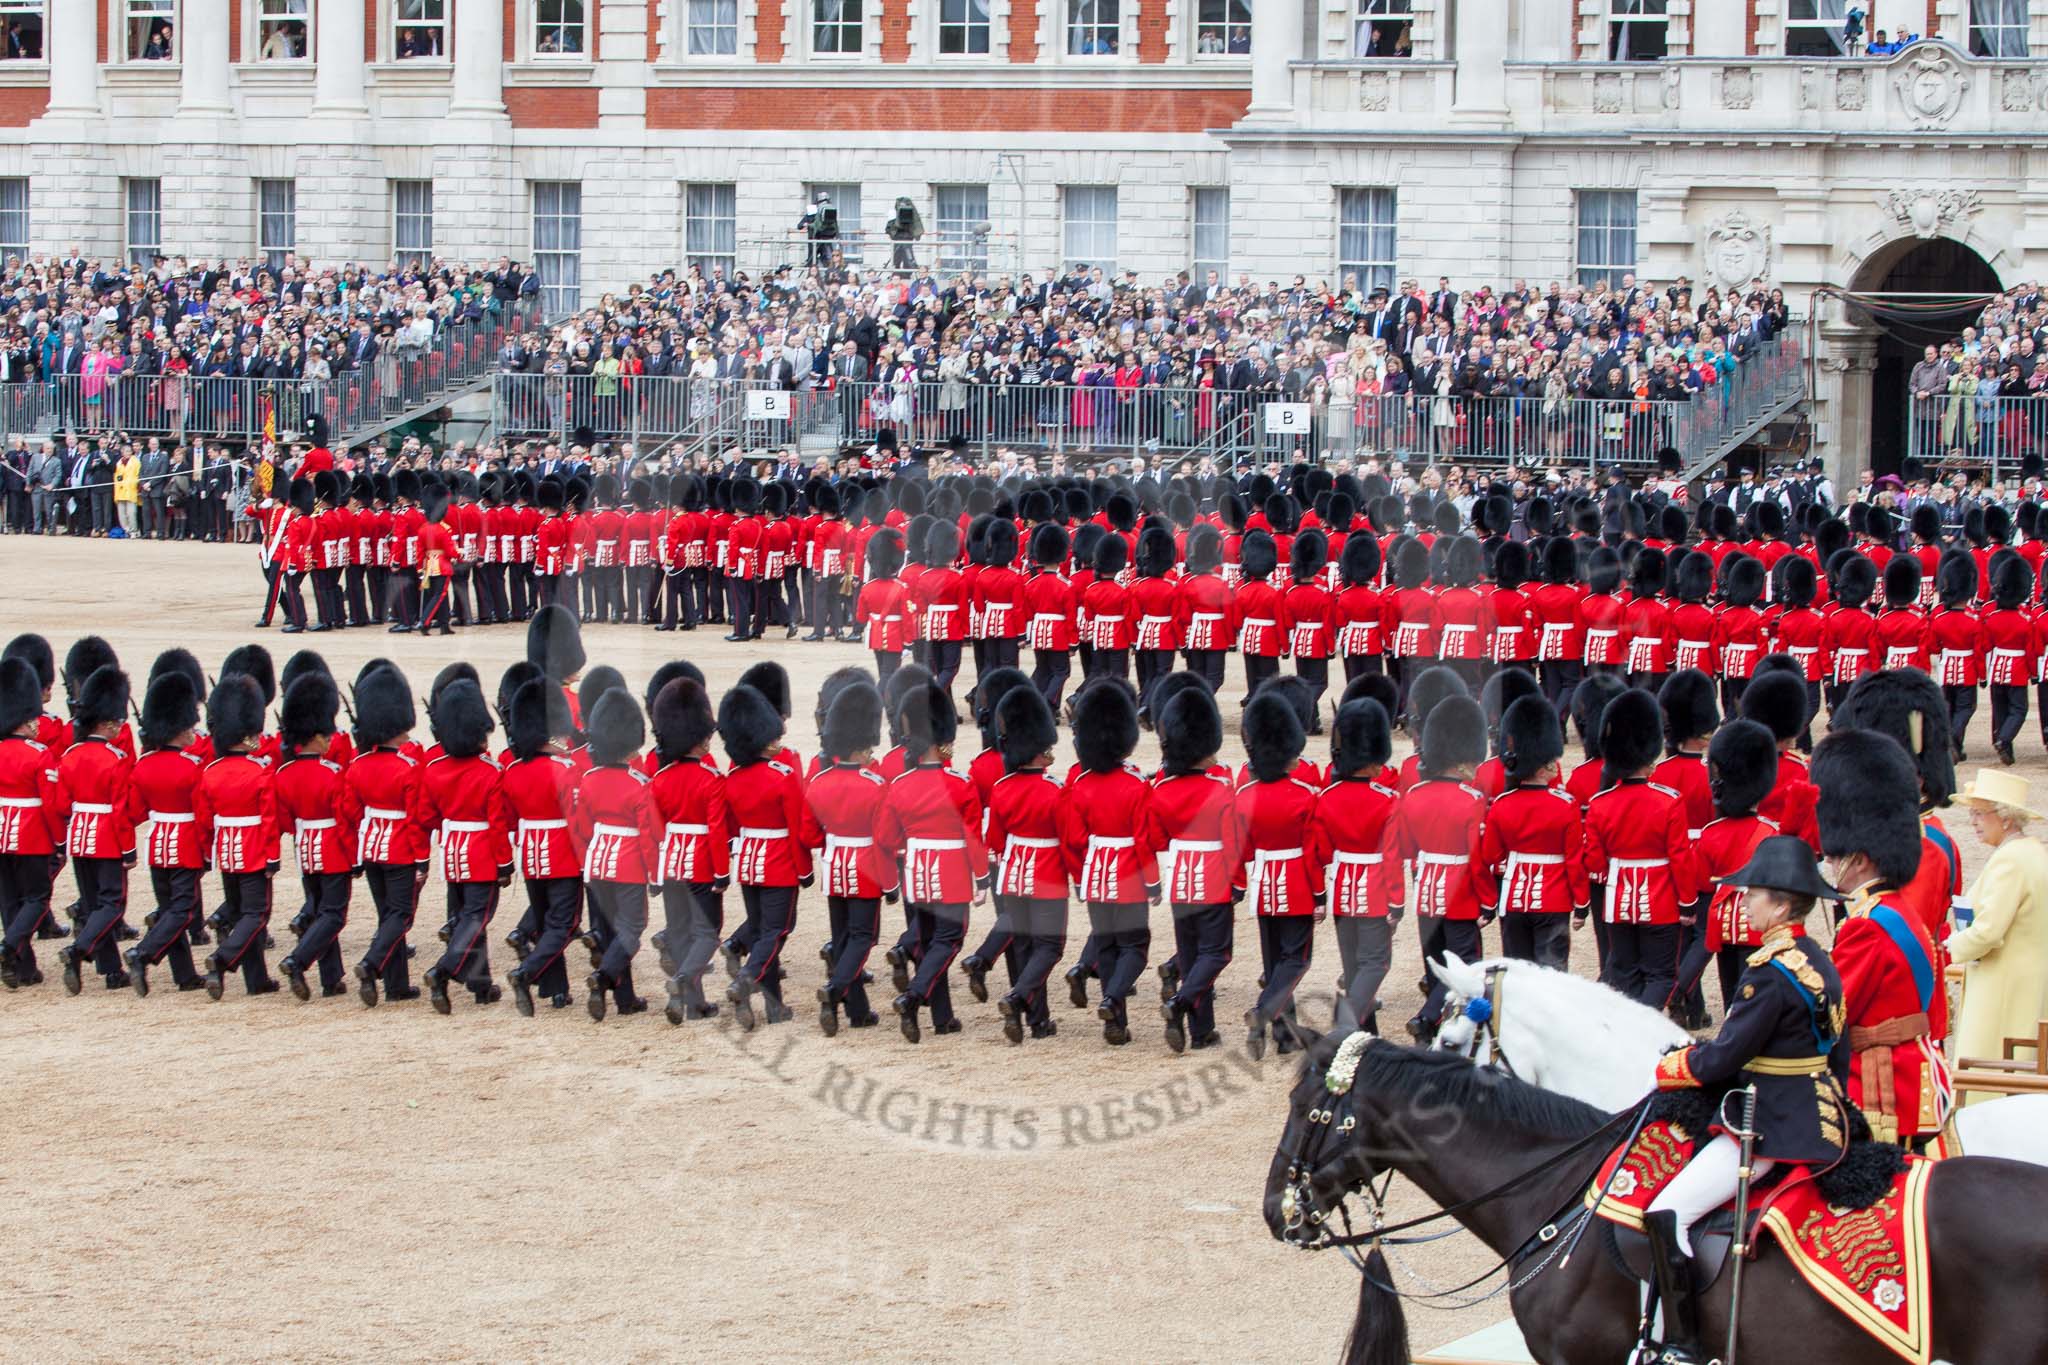 Trooping the Colour 2012: After all guards divisions have marched past Her Majesty in slow time, they are abot to march around Horse Guards parade again in quick time. On the top left No. 1 Guard, the Escort to the Colour, with the Colour just visible..
Horse Guards Parade, Westminster,
London SW1,

United Kingdom,
on 16 June 2012 at 11:38, image #440